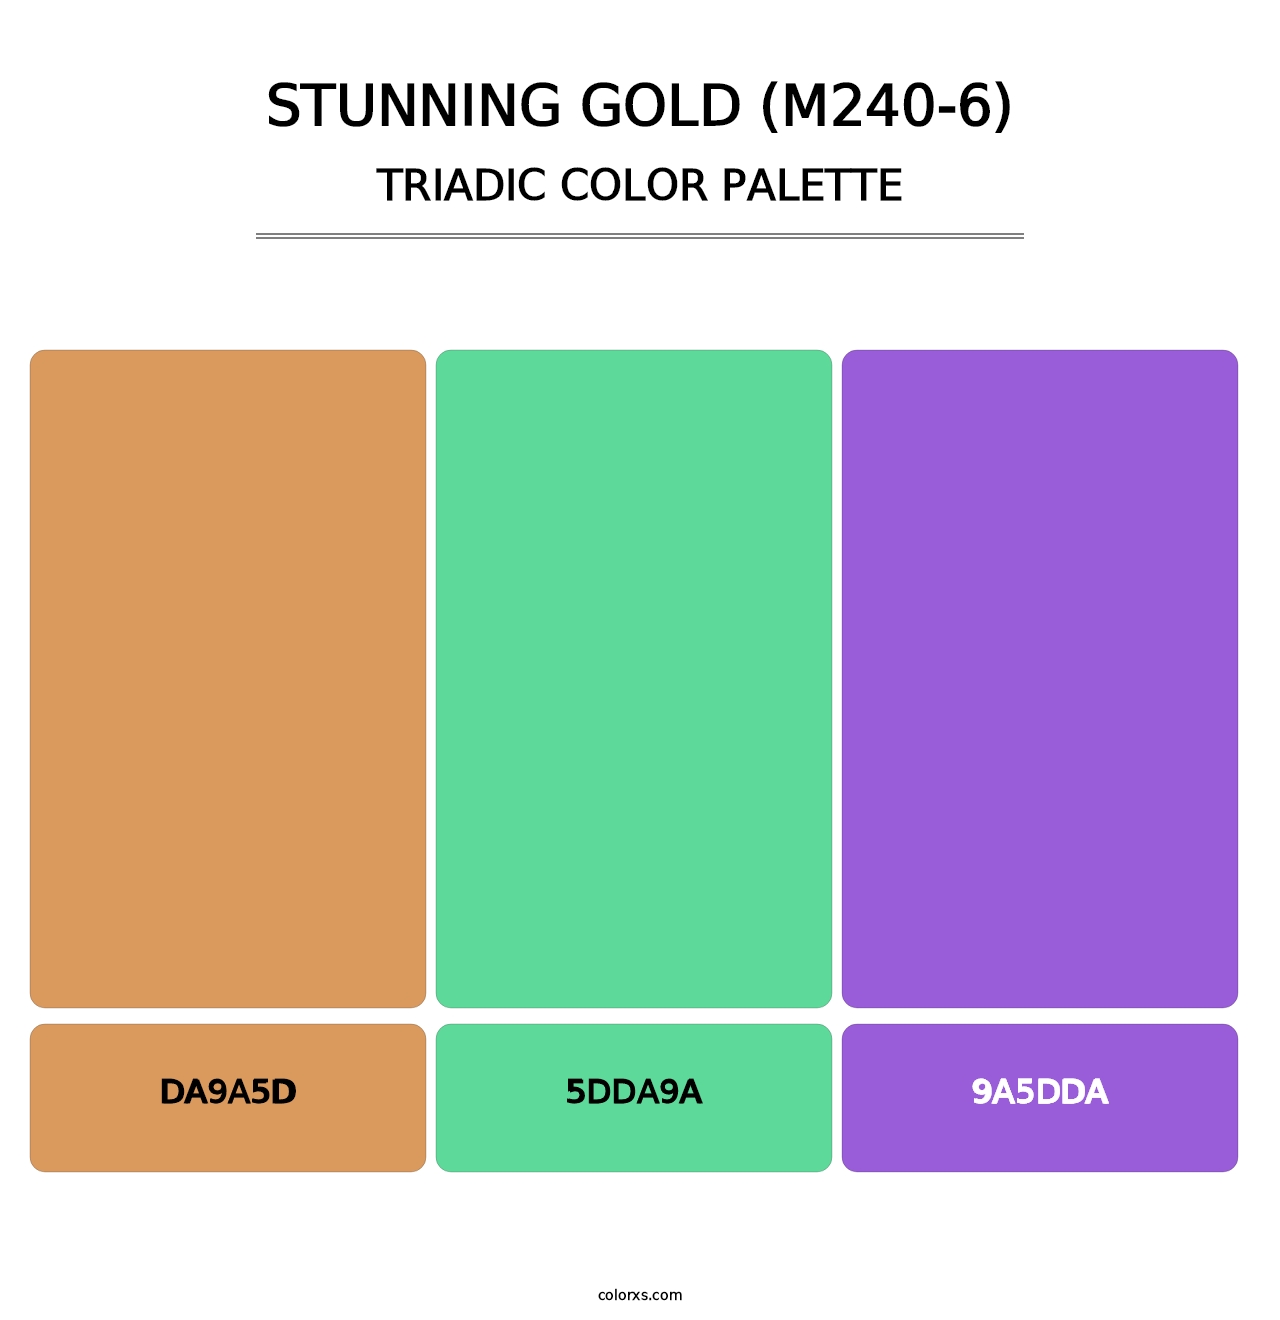 Stunning Gold (M240-6) - Triadic Color Palette